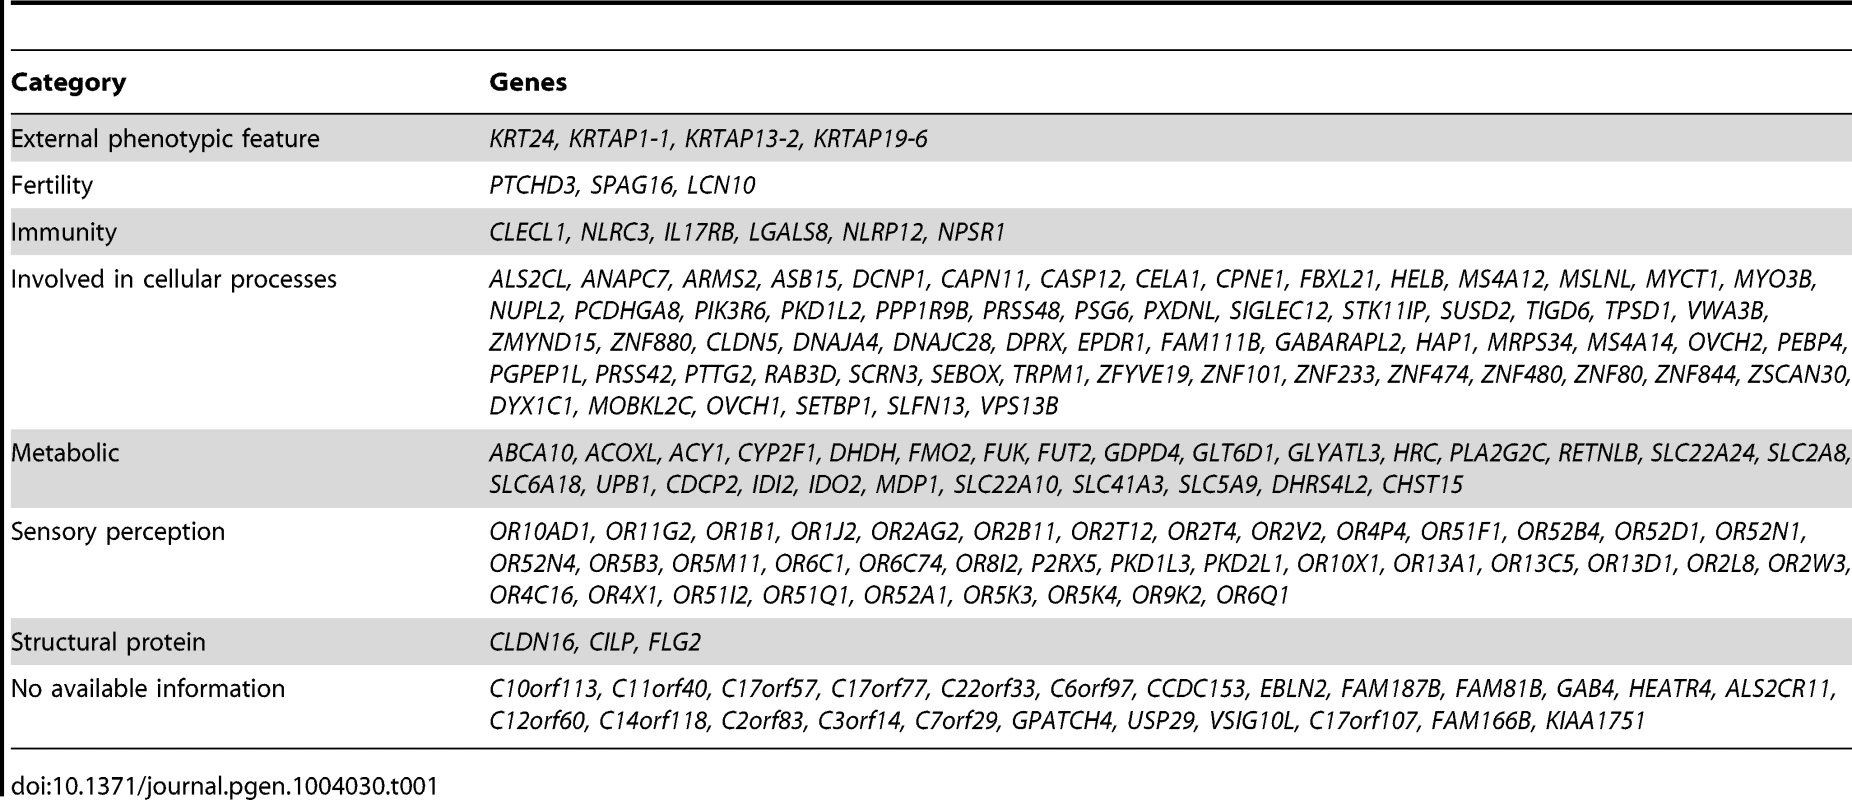 Summary of genes with biallelic LoF (please refer to Supp. &lt;em class=&quot;ref&quot;&gt;Table S2&lt;/em&gt; for a full list of the LoF alleles, and to Supp. &lt;em class=&quot;ref&quot;&gt;Table S4&lt;/em&gt; for a full list of the reported function for each of these genes and the score of the LoF allele).